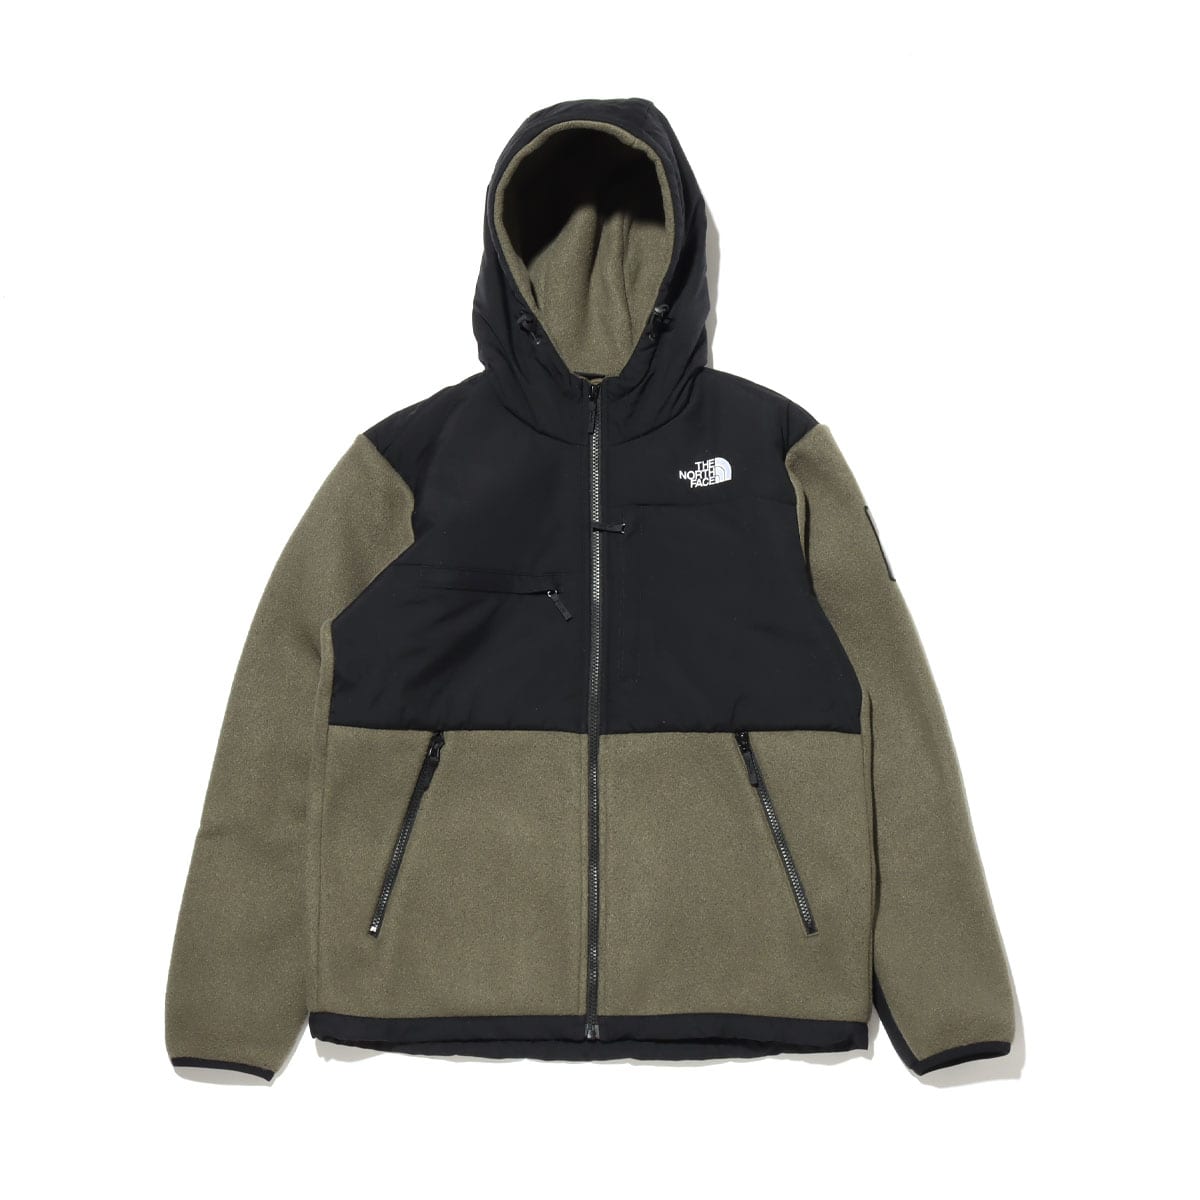 THE NORTH FACE DENALI HOODIE NEWTAUPE 23FW-I